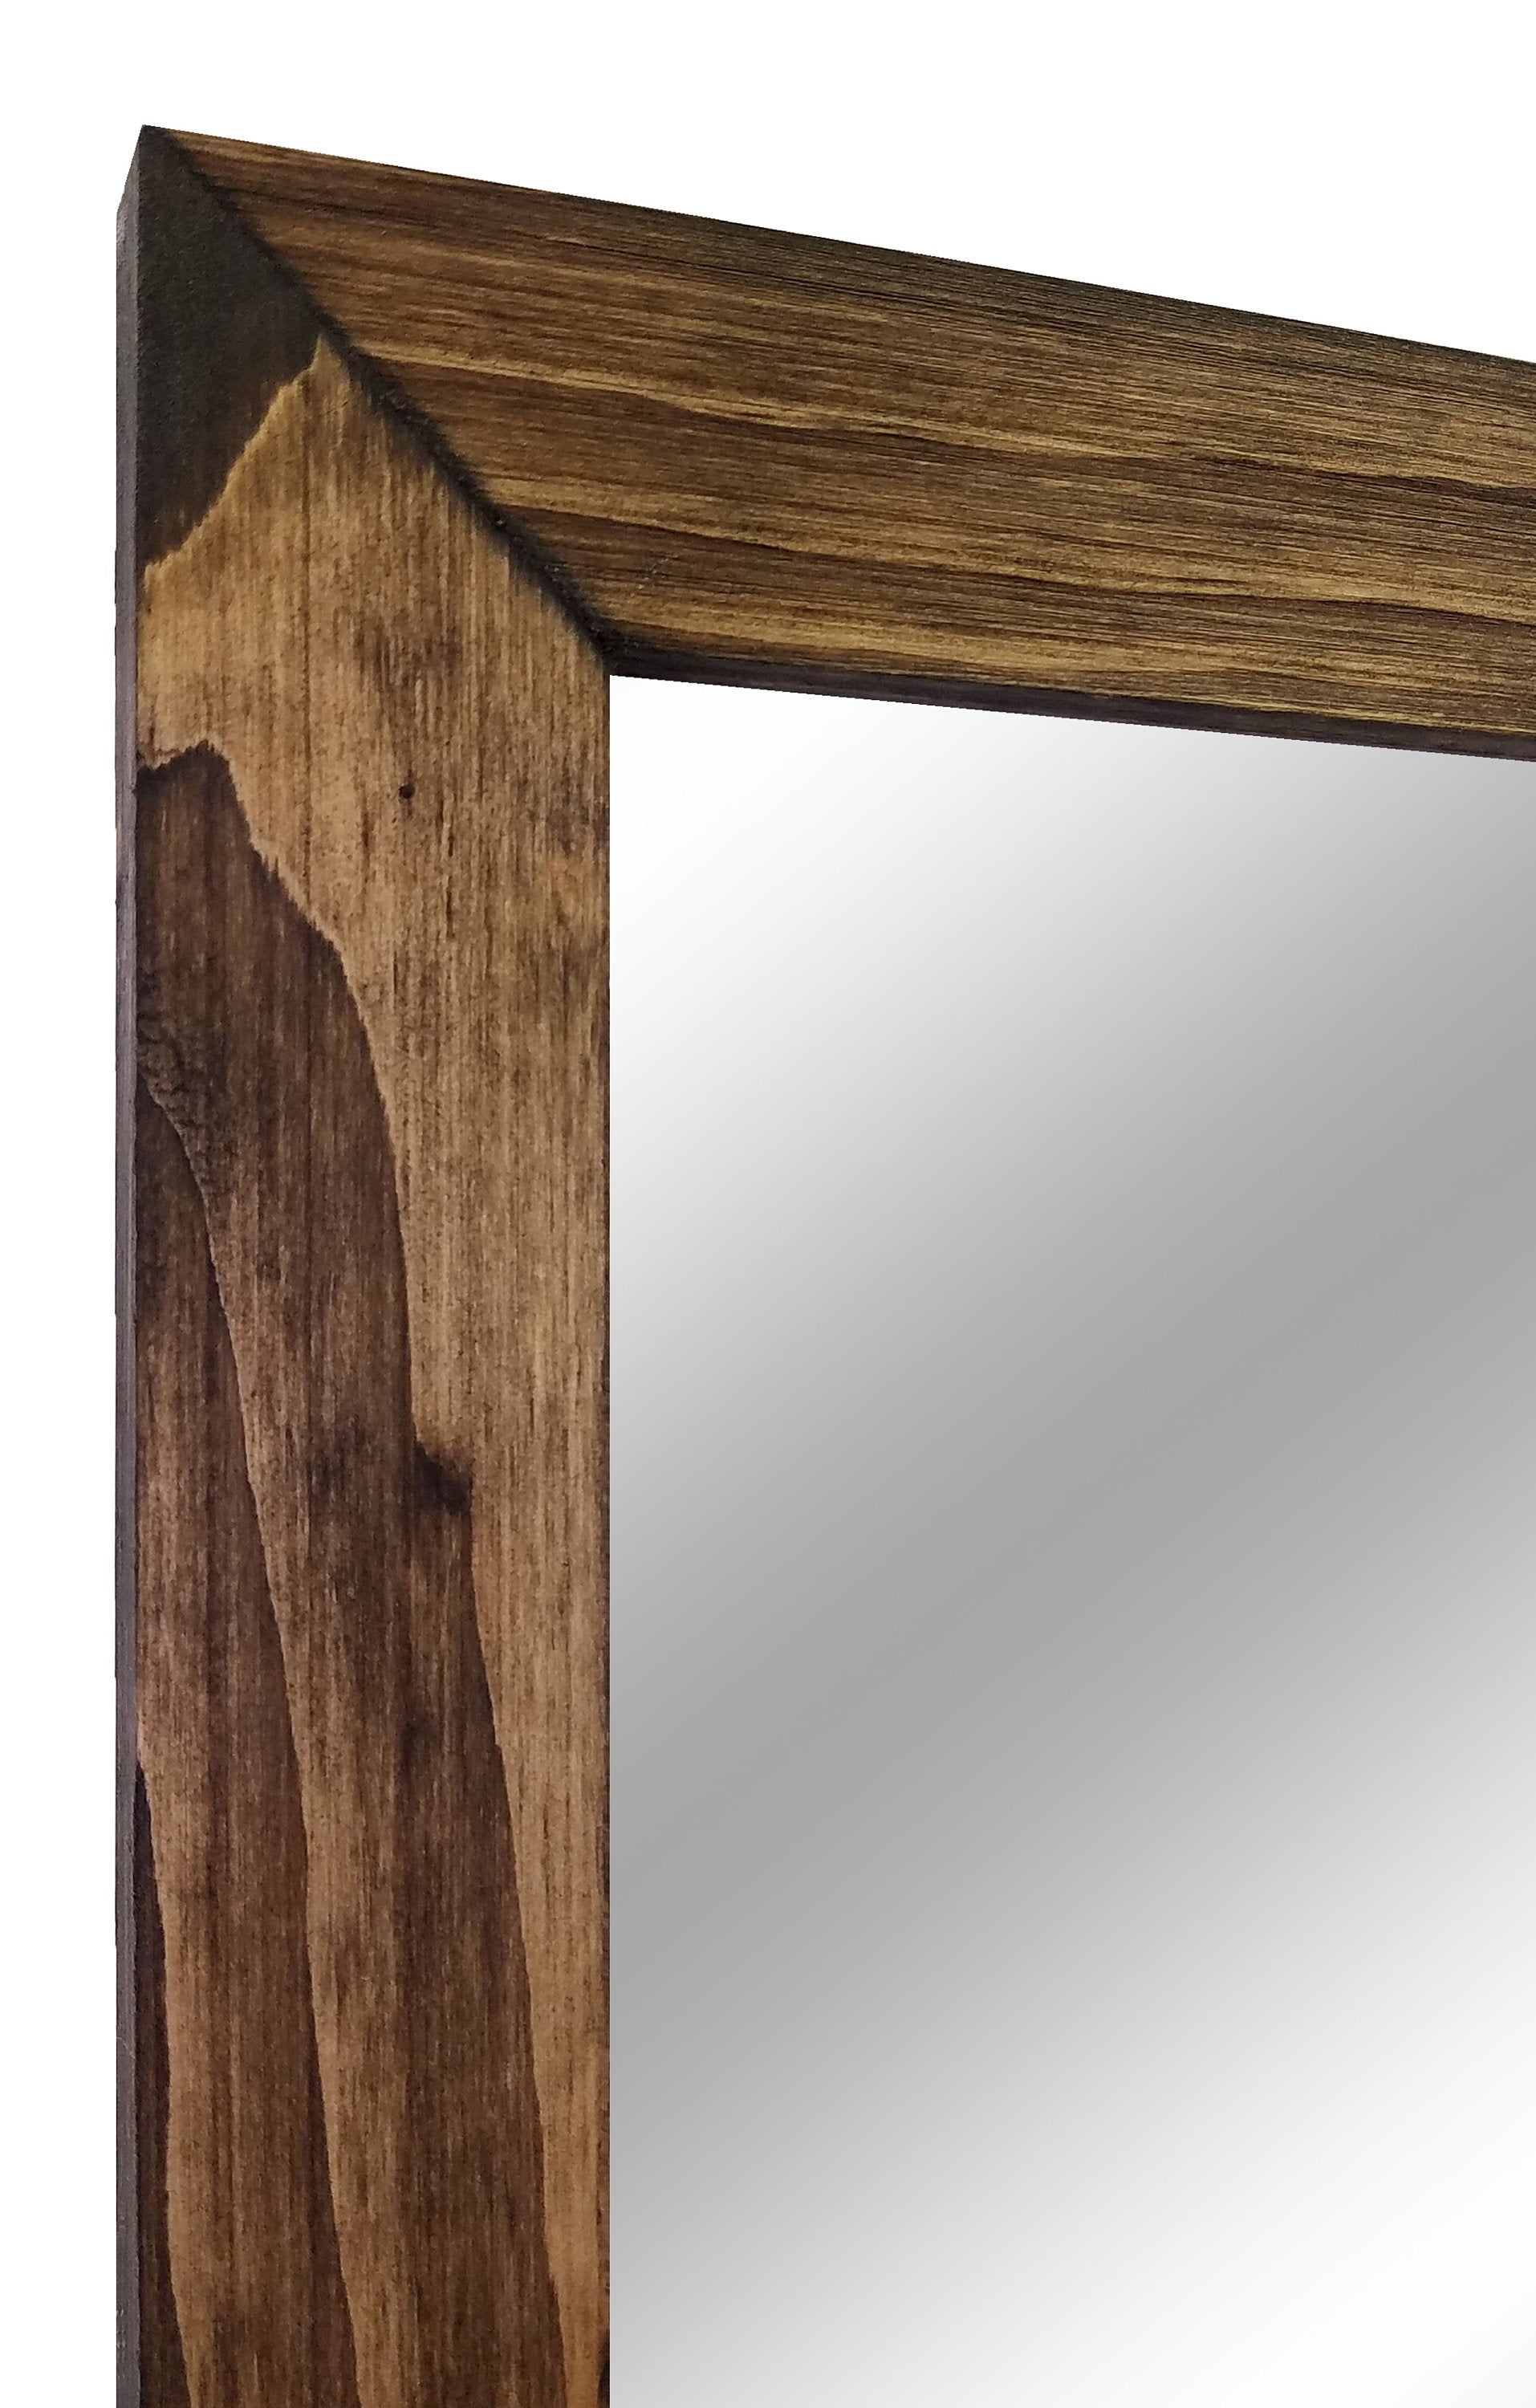 Carriage House Framed Mirror - Available In 6 Sizes & 20 Colors, Shown in Dark Walnut